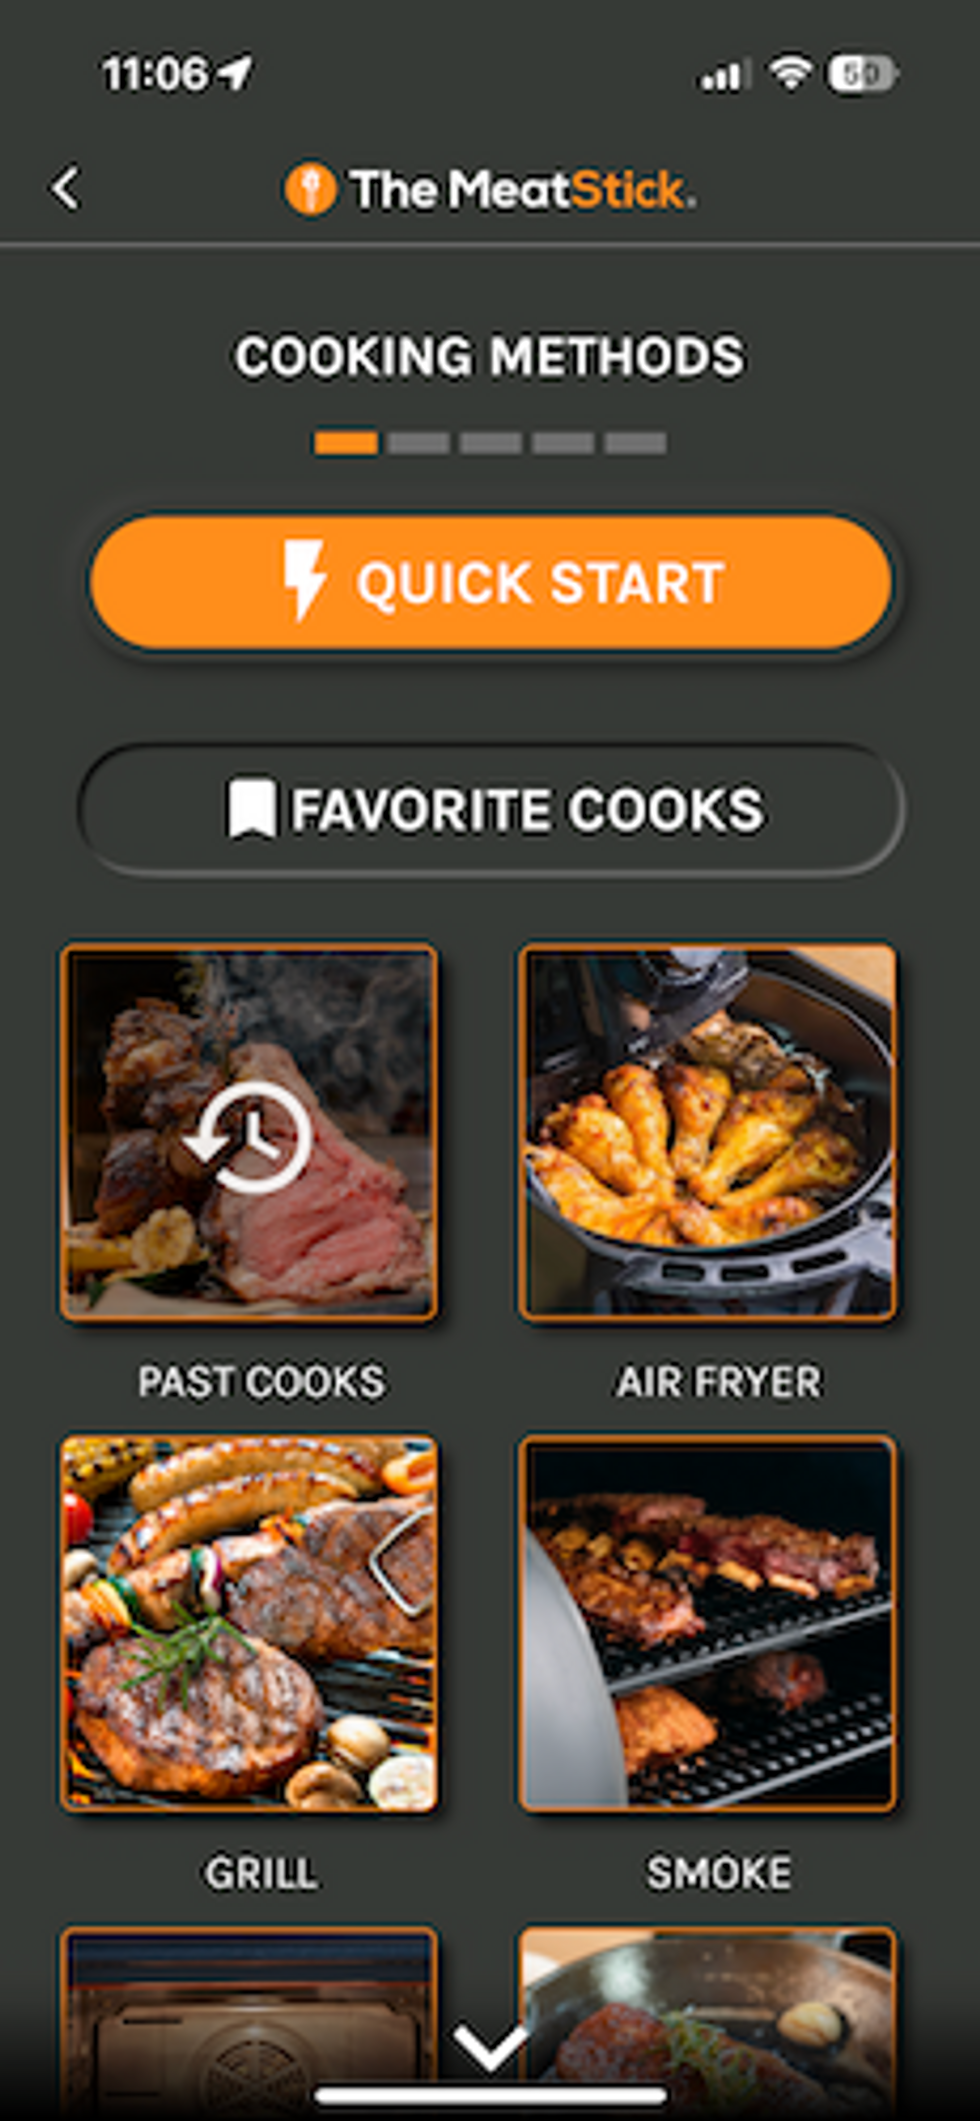 Select type of cooking you plan to do in the app